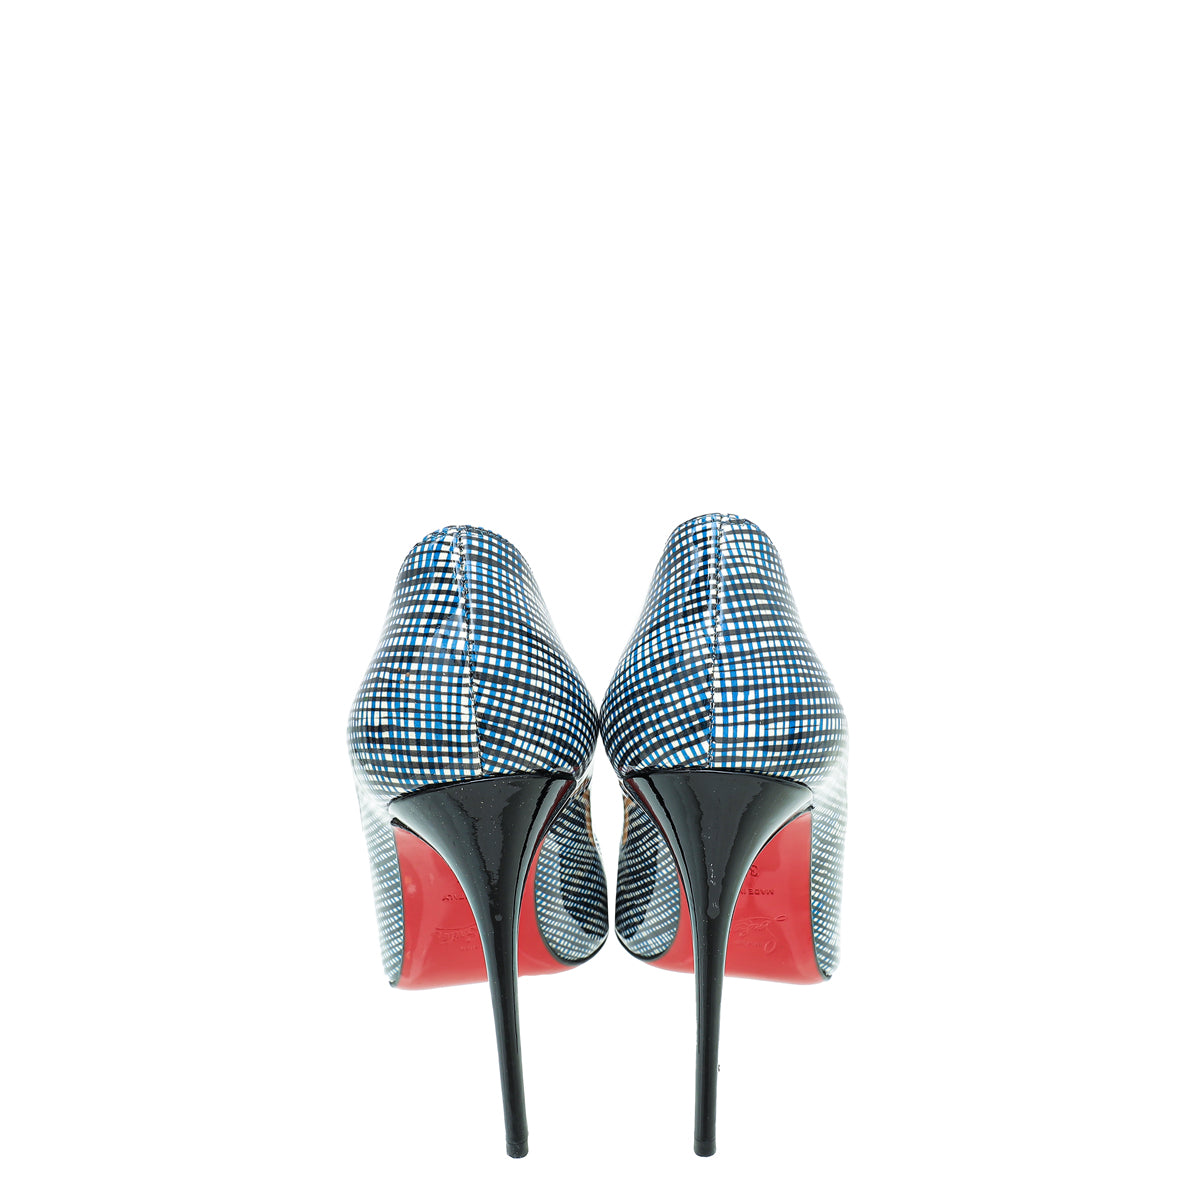 Christian Louboutin Tricolor Checkered So Kate 120 Pumps 37.5